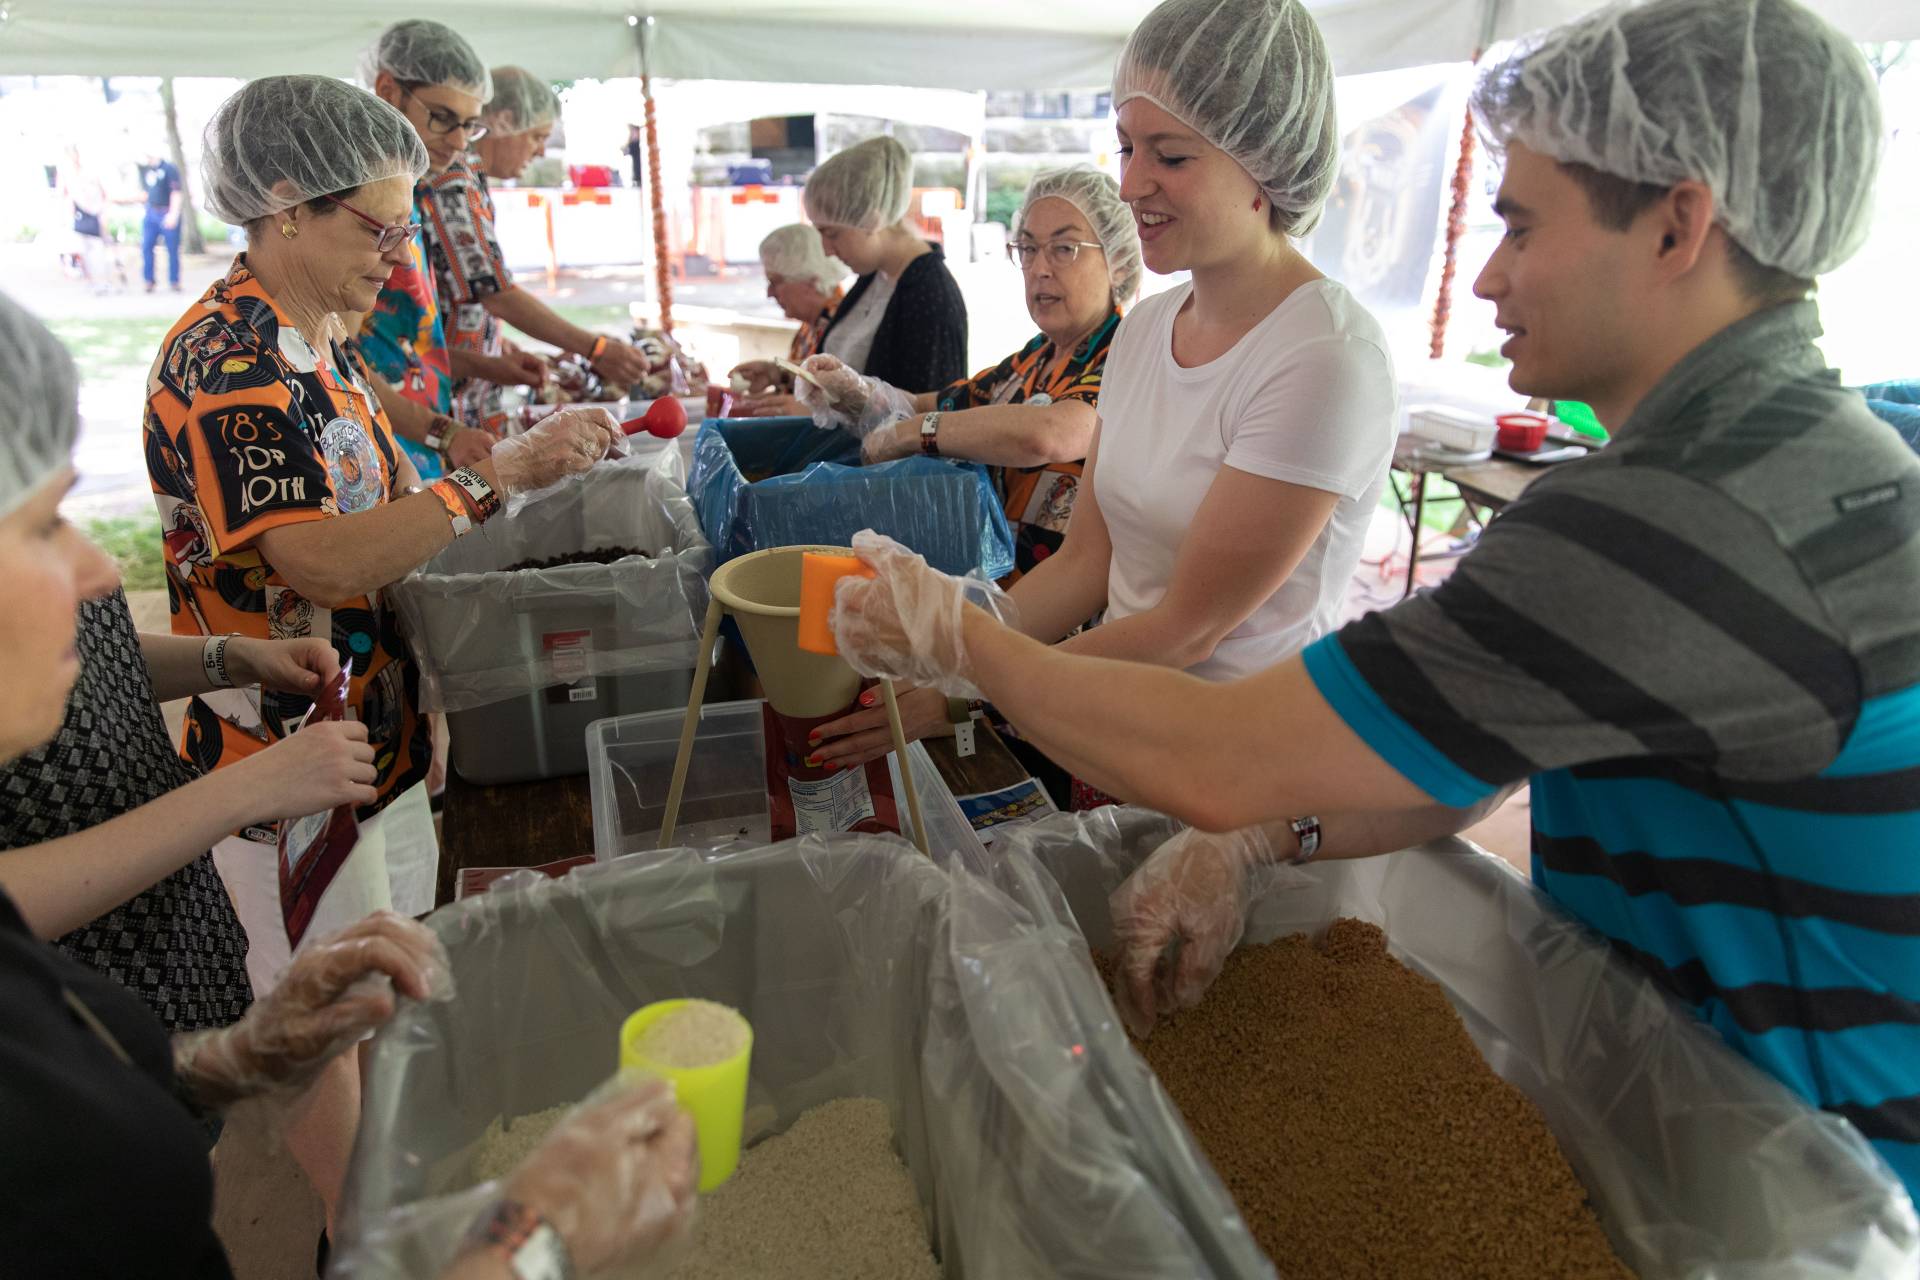 Alumni packing lunches for Kids Against Hunger during reunions